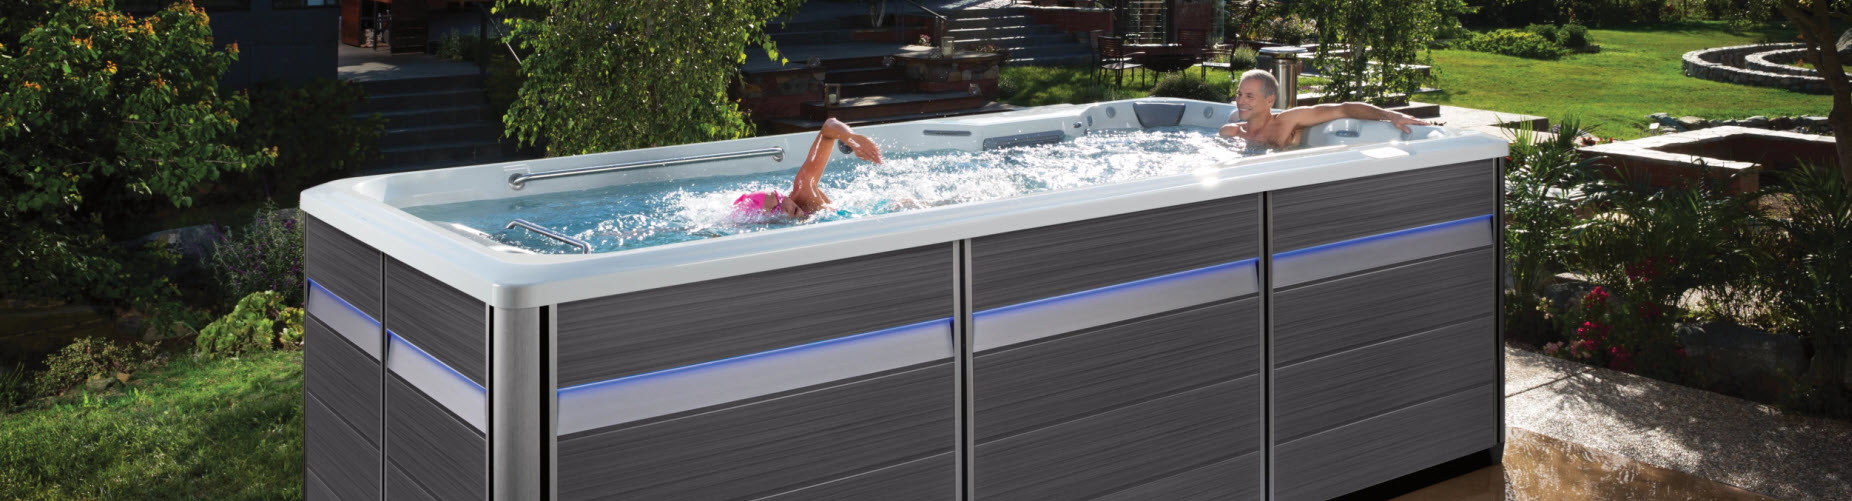 3 Reasons Why You Need a Lap Pool This Year, Swim Spa with Hot Tub Butler